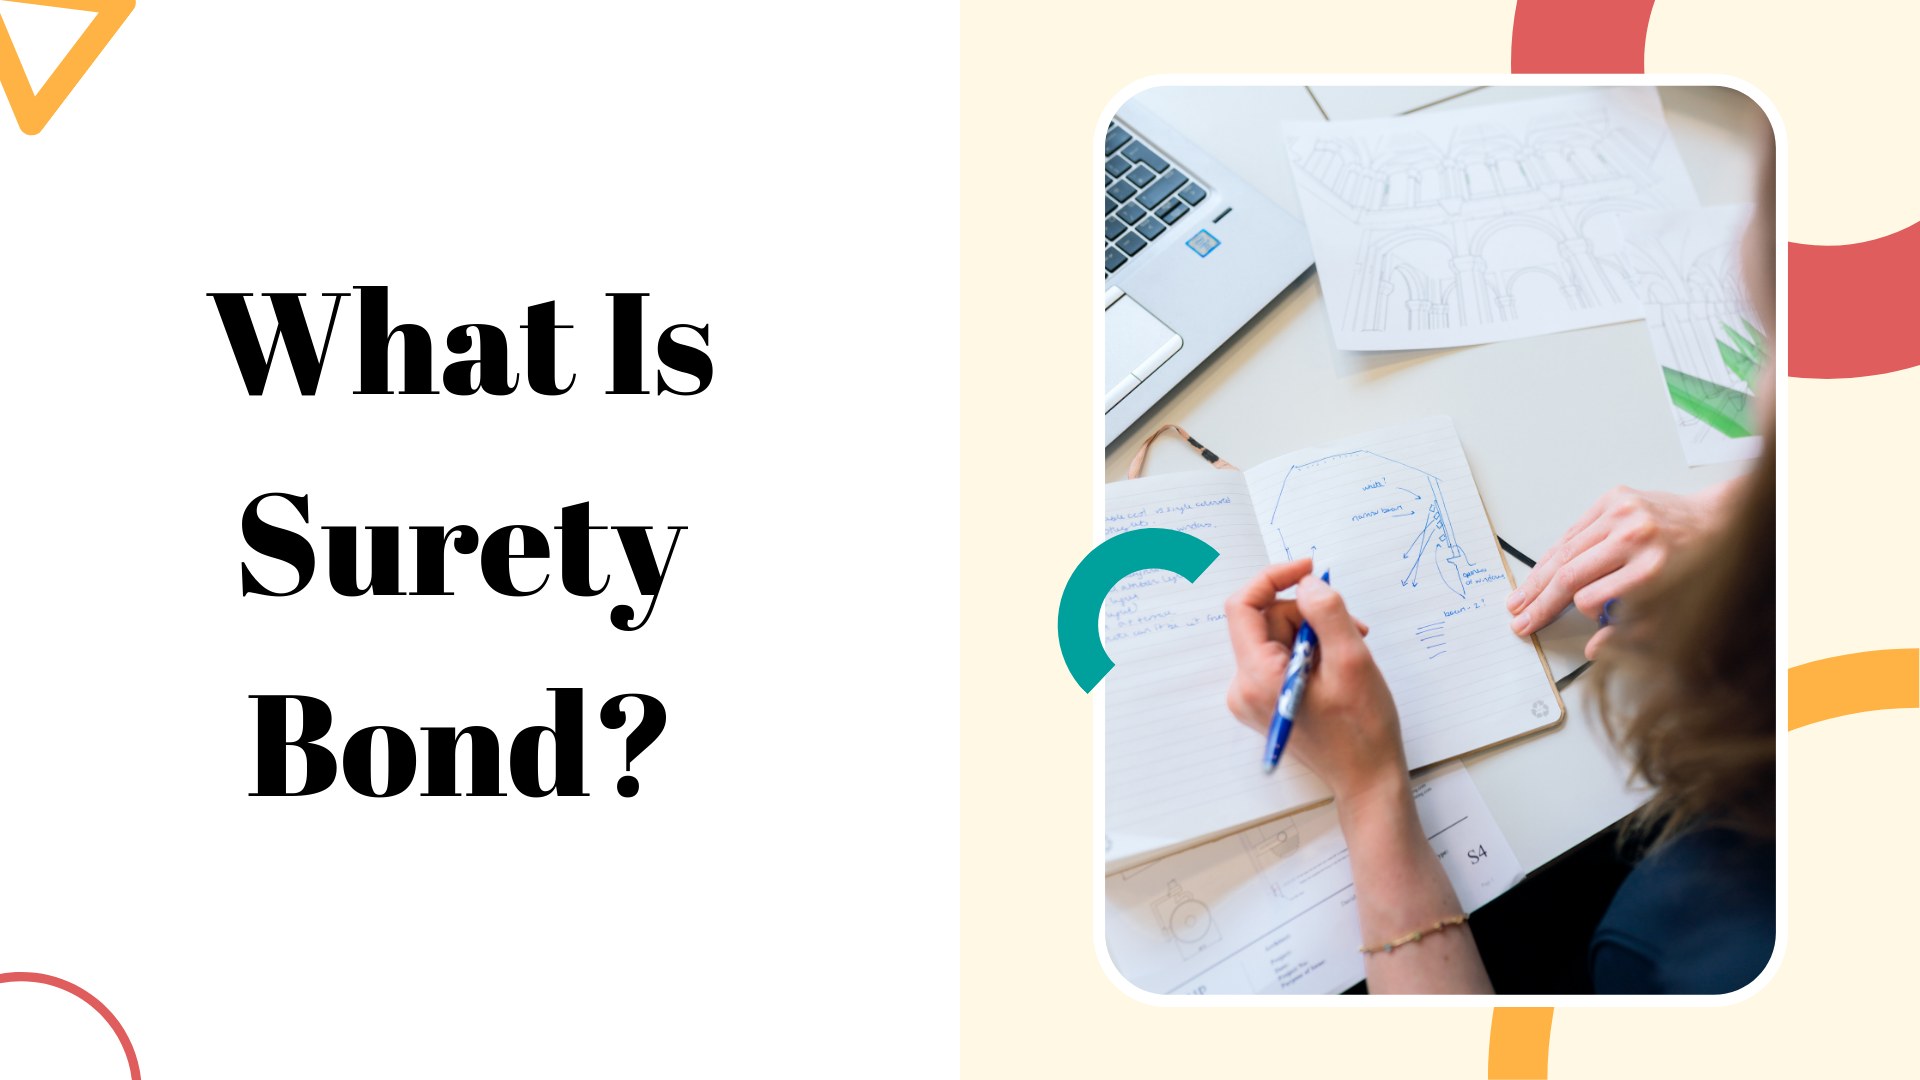 surety bond - What is a surety bond and what are its purposes - working